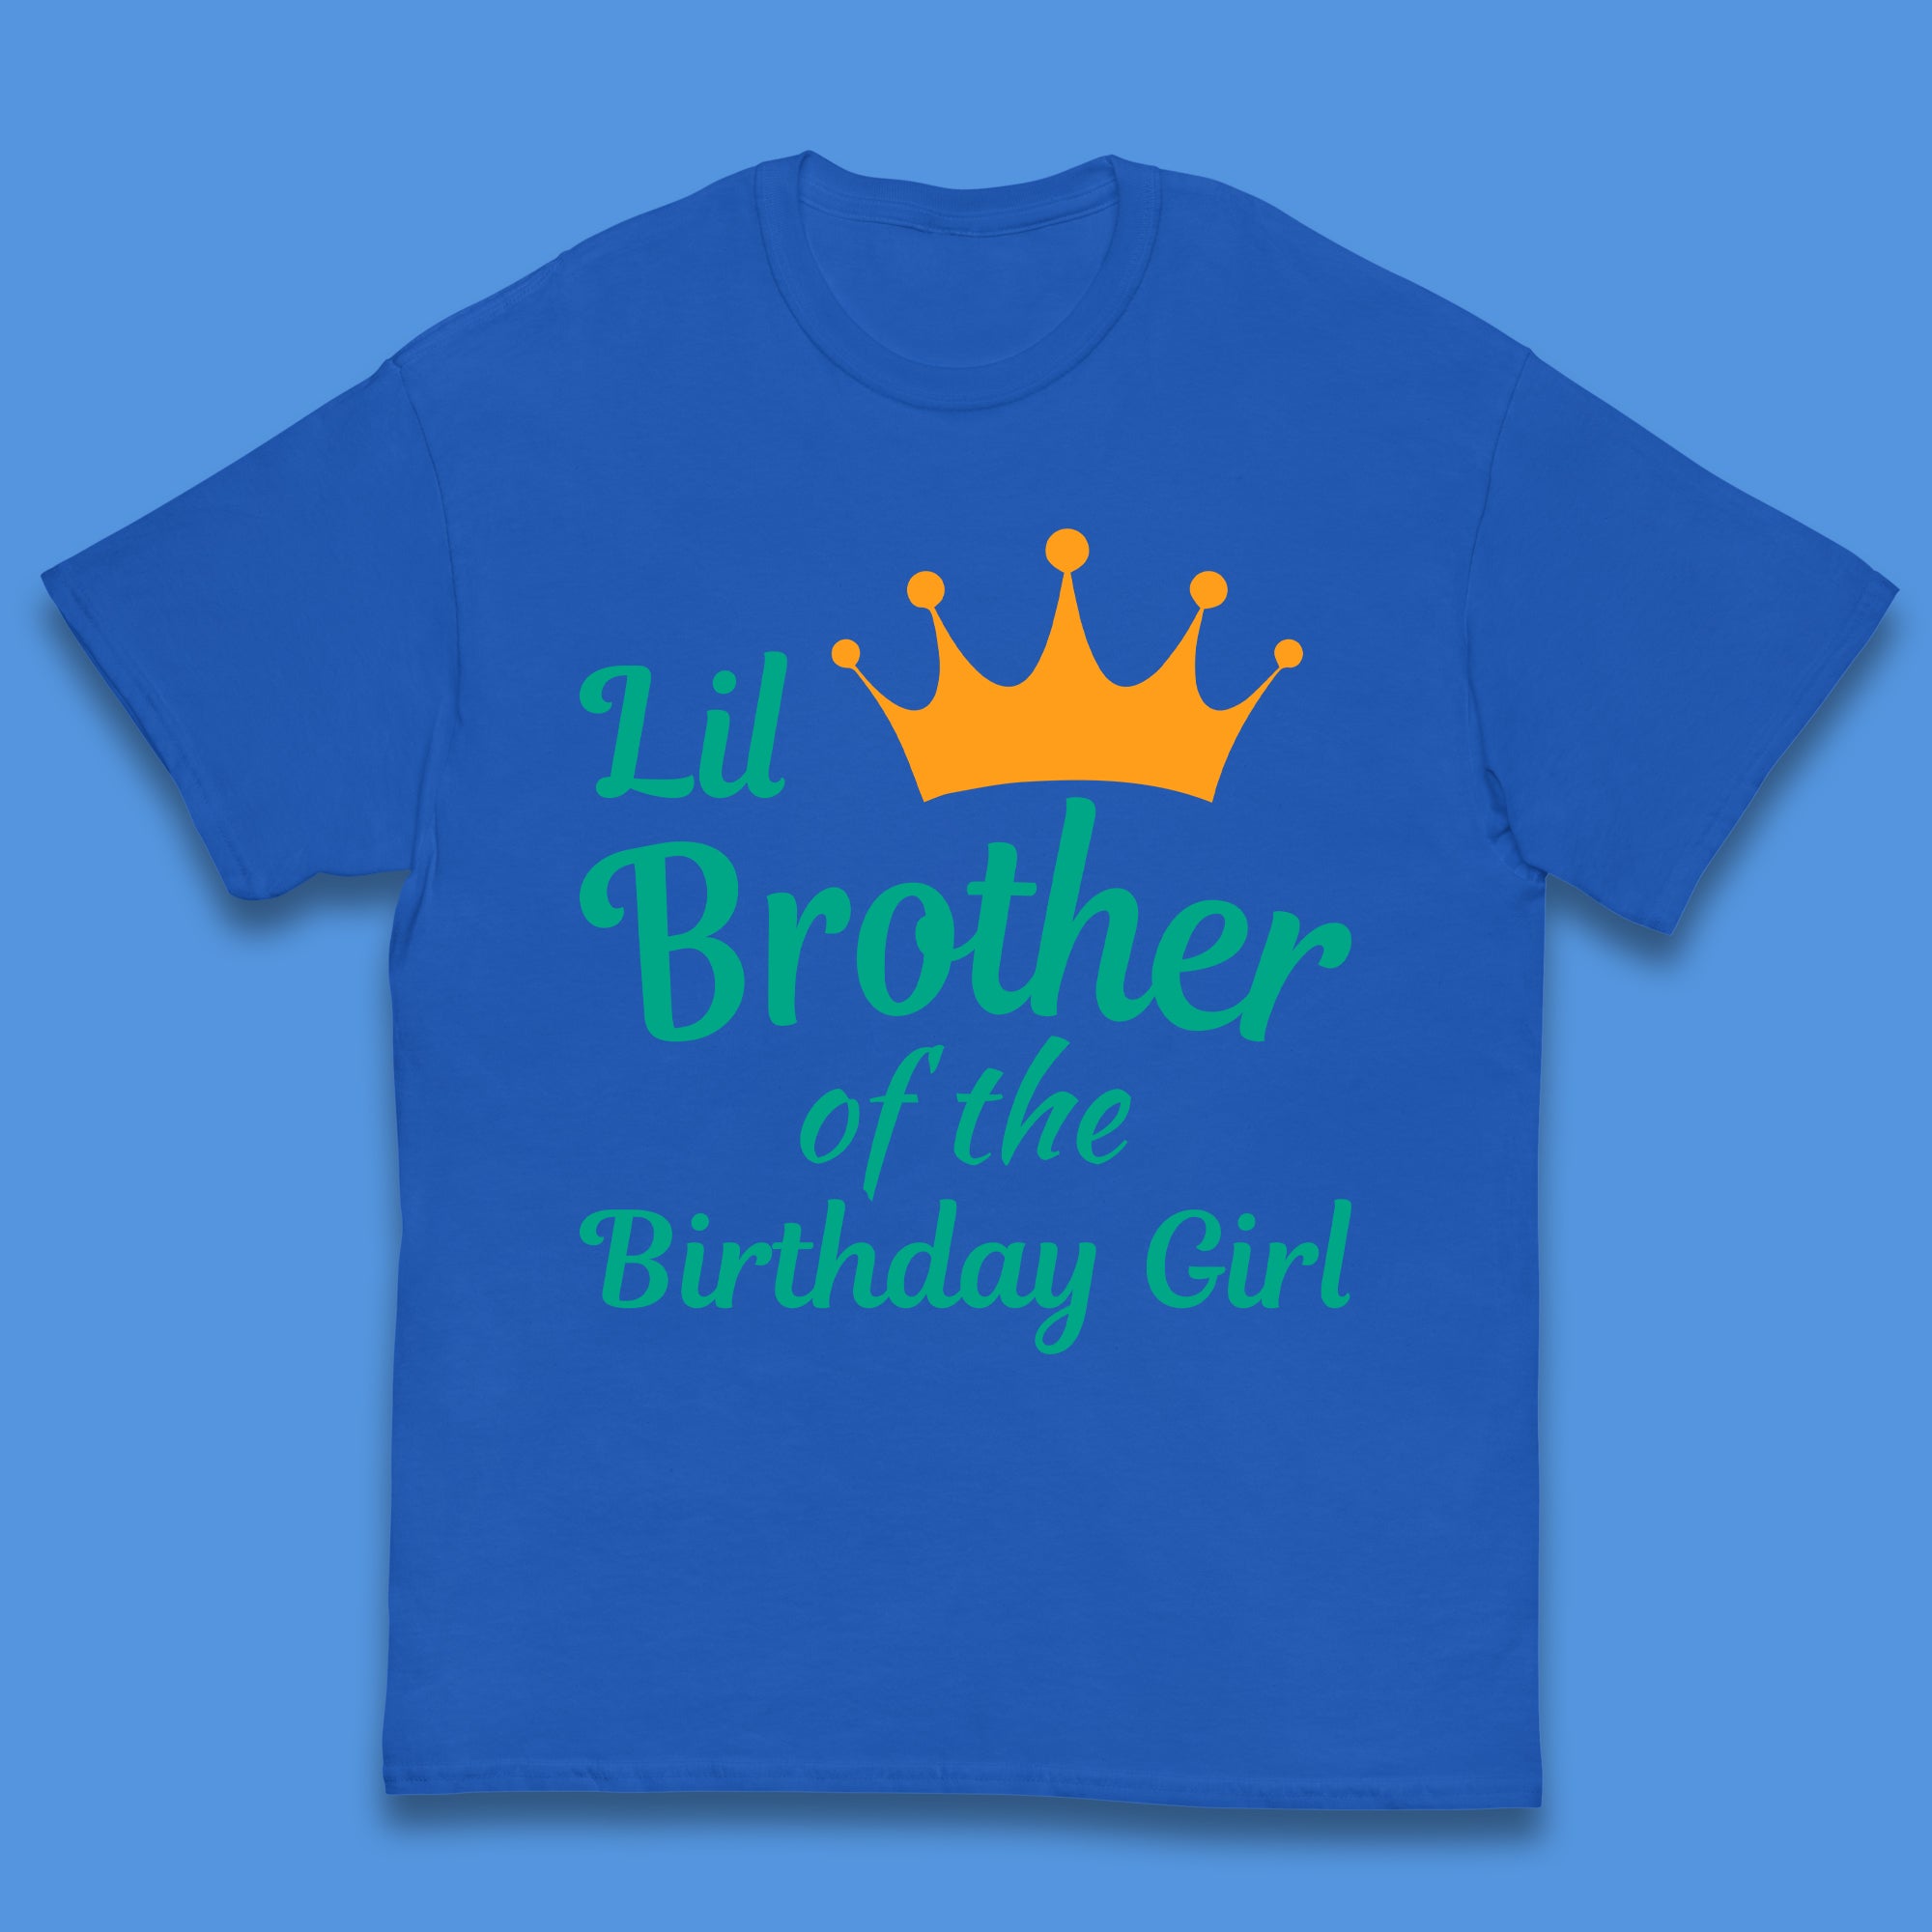 Lil Brother Of The Birthday Girl Kids T-Shirt